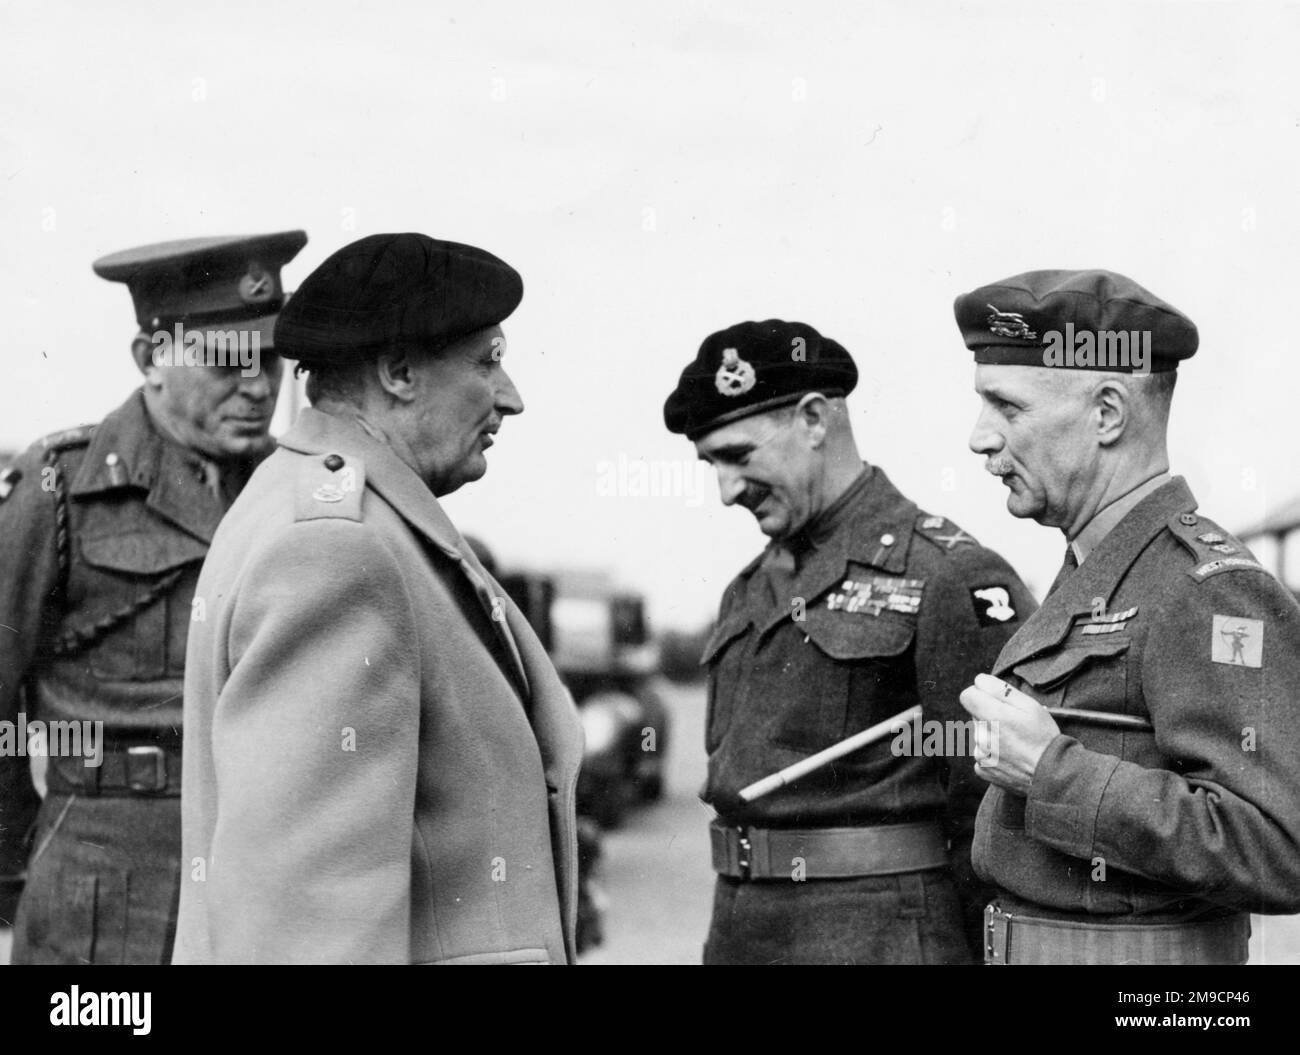 General Sir Montagu Stopford (1892-1971), Field Marshal Bernard Law Montgomery, 1st Viscount Montgomery of Alamein (1887-1976), and two other officers, probably during an inspection visit to an army camp. Stock Photo